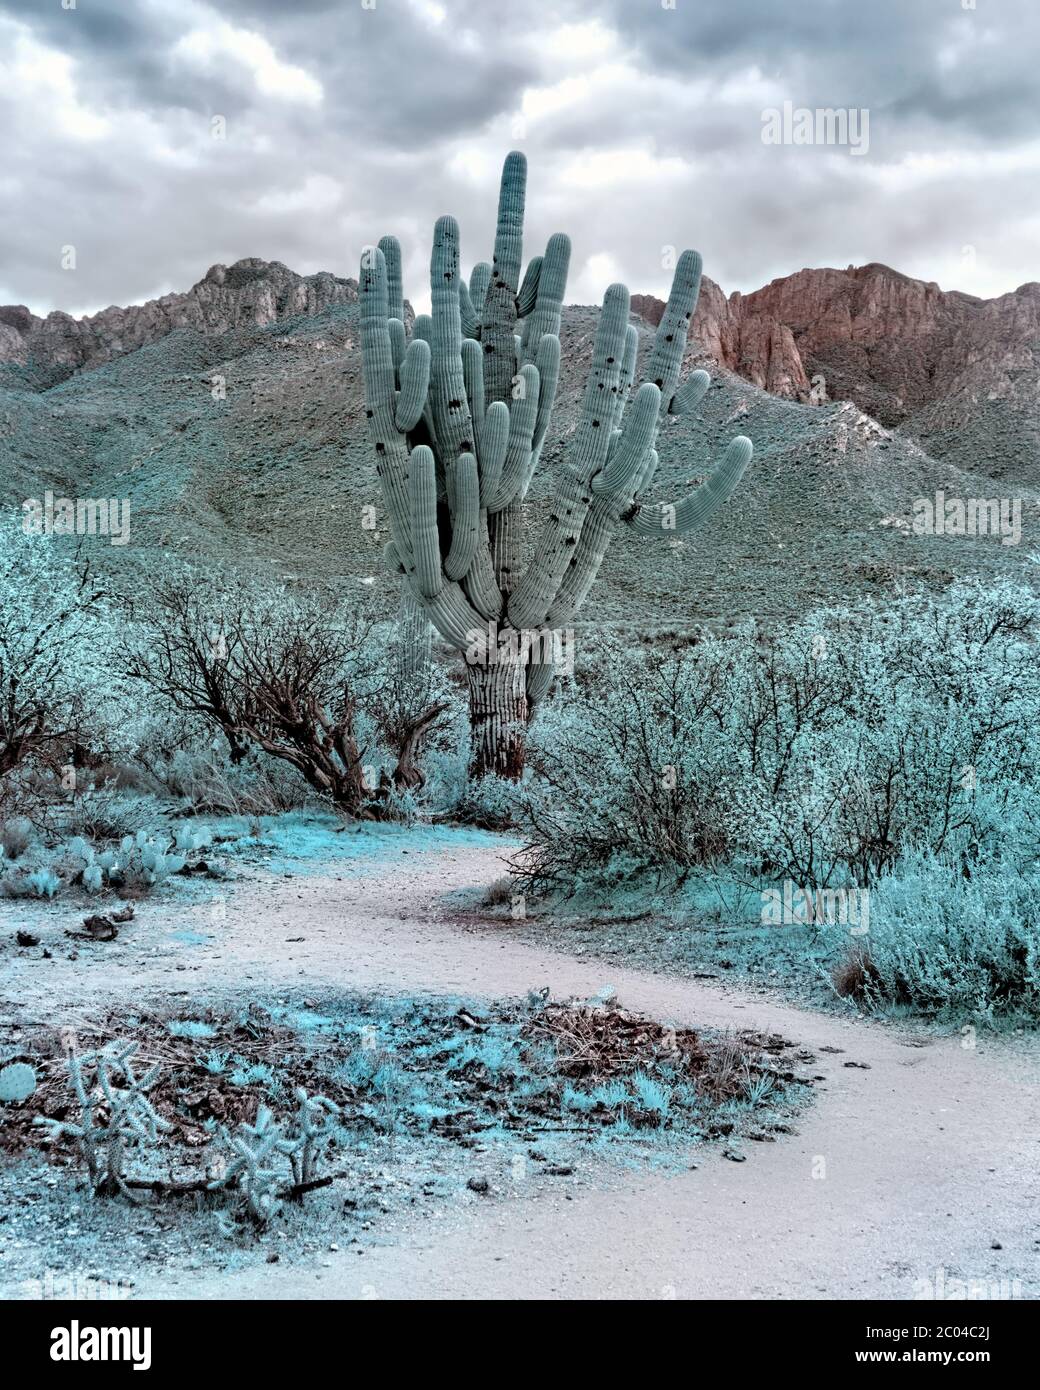 Infrared Image 560nm with Saguaro Cactus and mountains in Pinal County of Southern Arizona in the Desert vegetation of the Tucson area in Winter Stock Photo